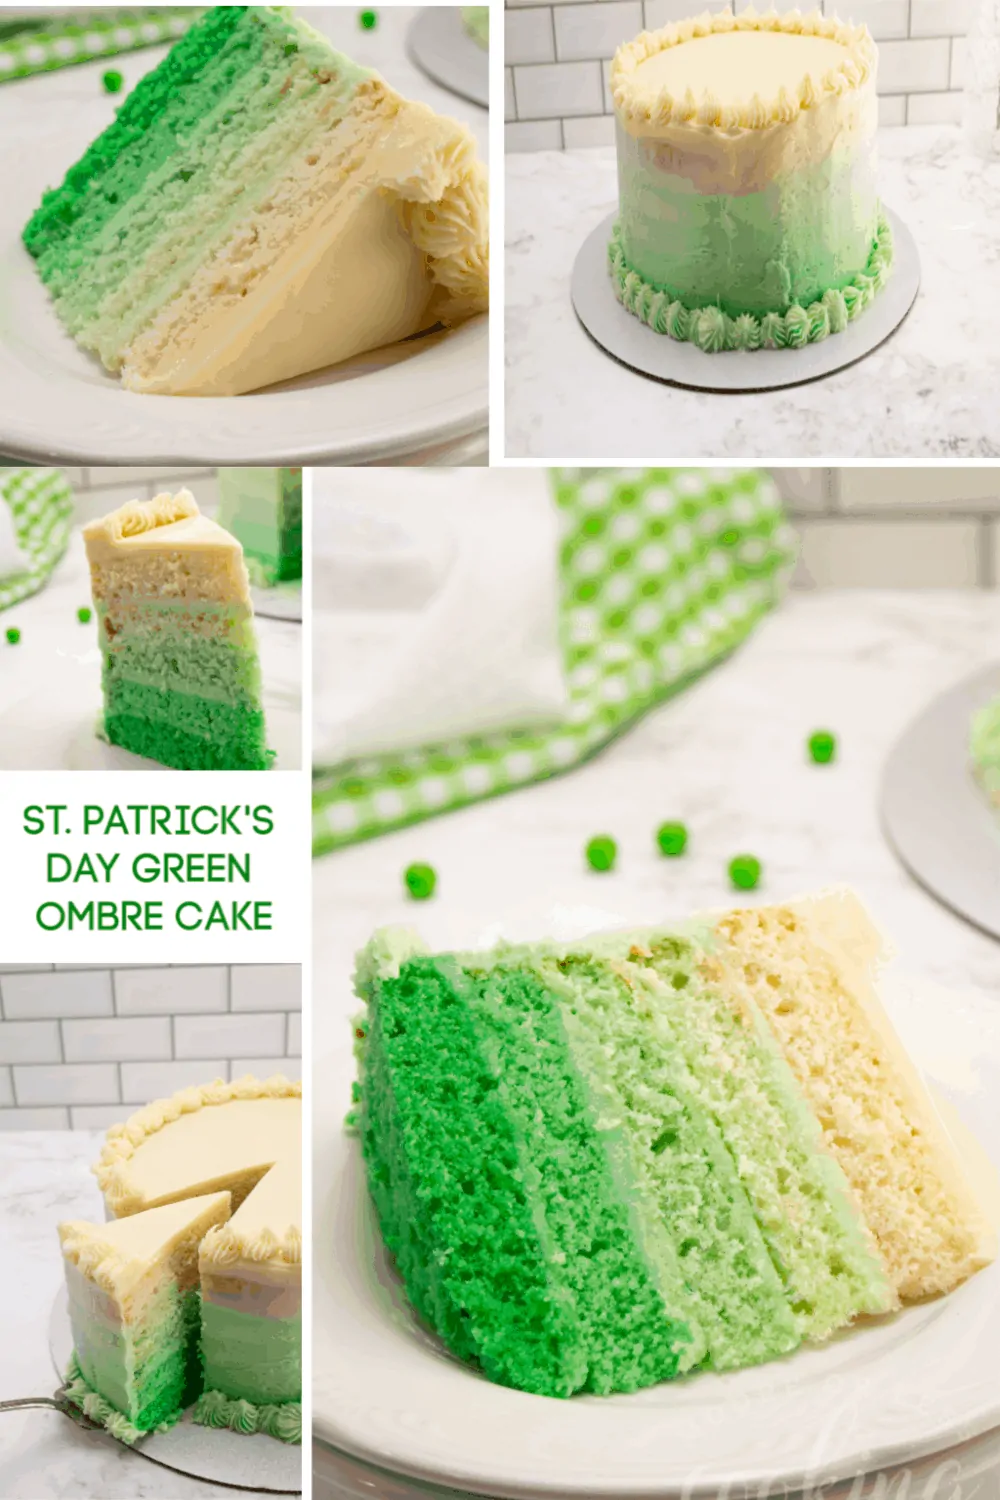 Are you looking to make something special for St. Patricks Day? Try making this beautiful St. Patrick’s Day Green Ombre Cake and show off your baking skills! #Stpatricksdaycake #mooreorlesscooking via @Mooreorlesscook